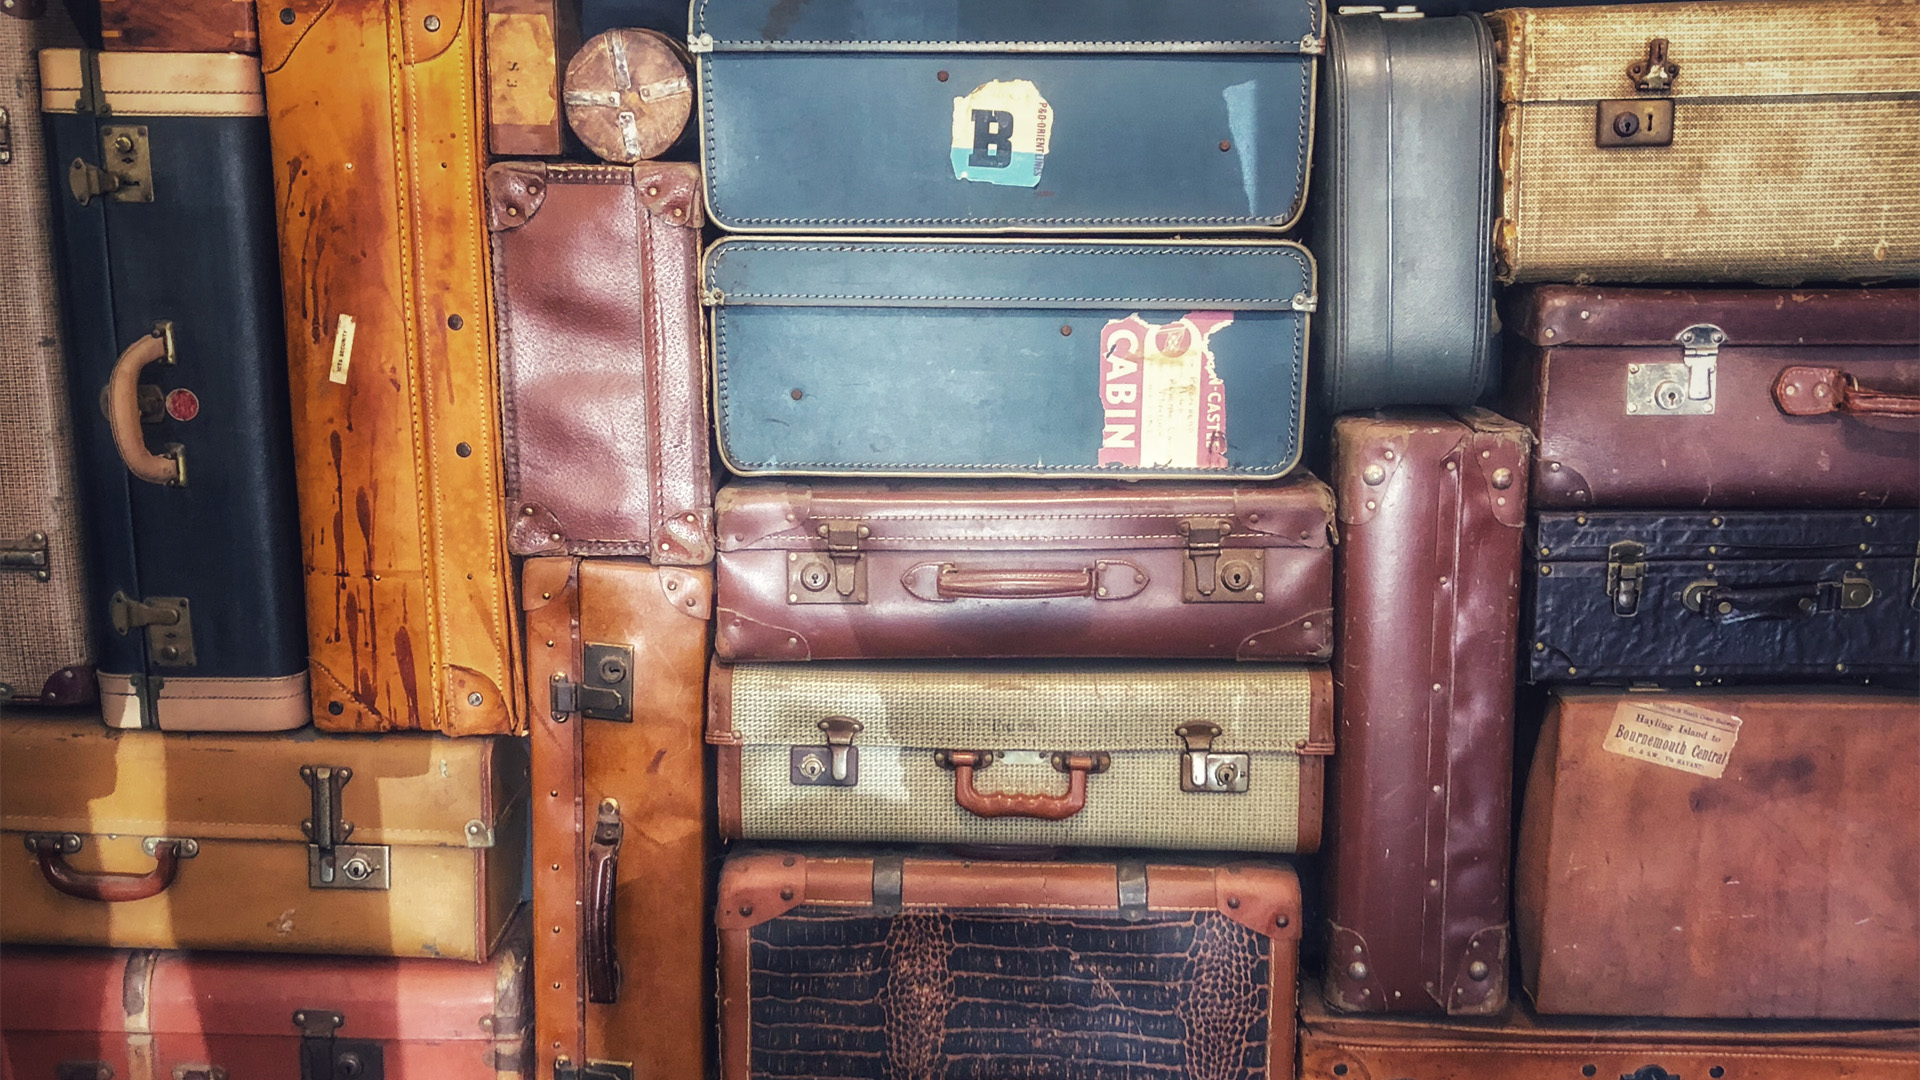 decorative: image of a large stack of suitcases of varying sizes